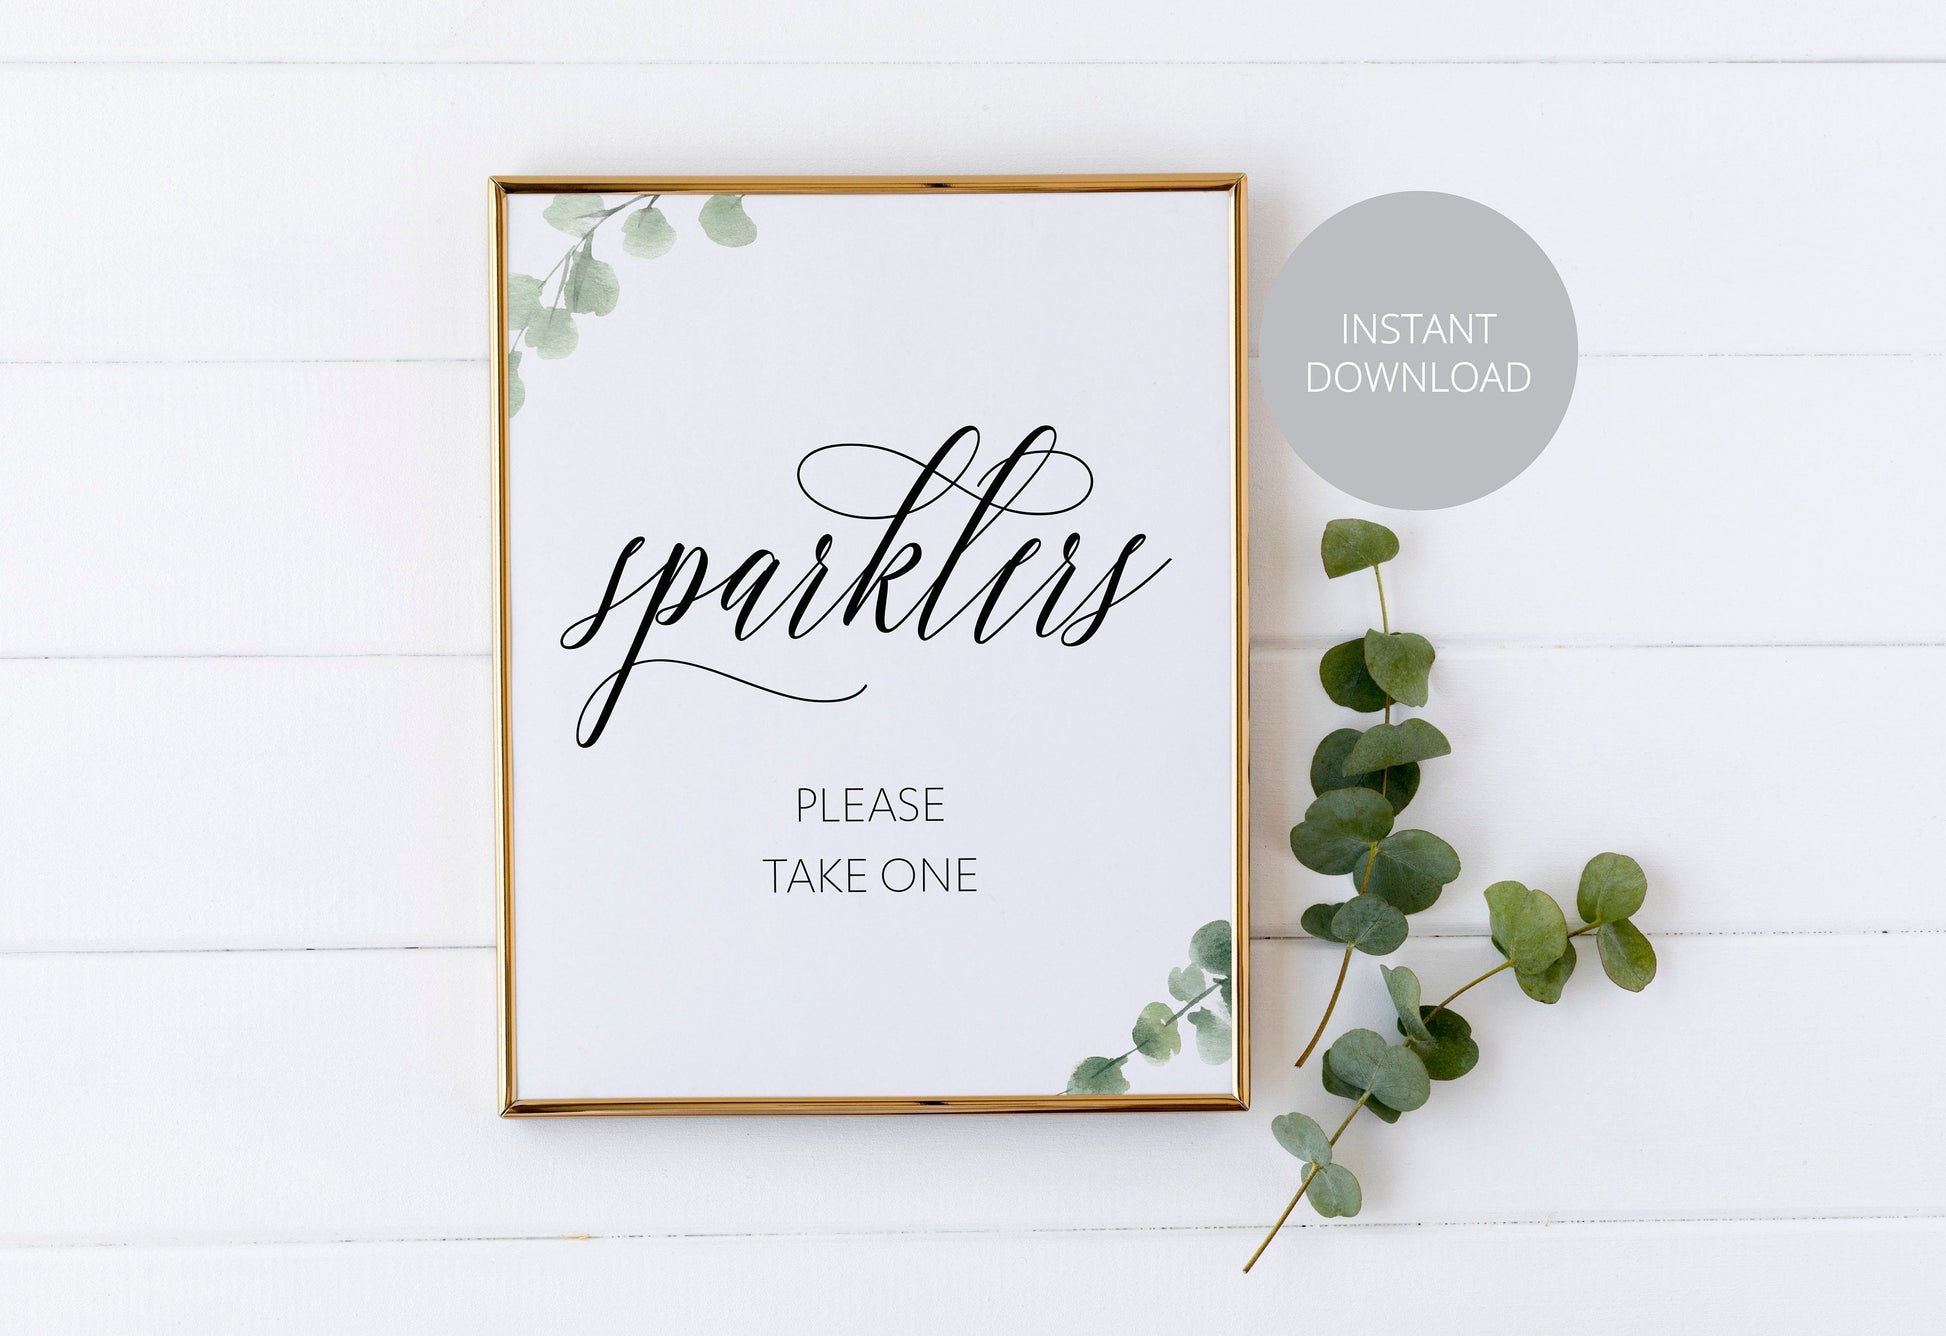 Sparklers Wedding sign, Please Take One,Rustic Wedding, Wedding Signs, Printable, Wedding Decor,Sparkler Send off, Instant Download SIGNS | PHOTO BOOTH SAVVY PAPER CO